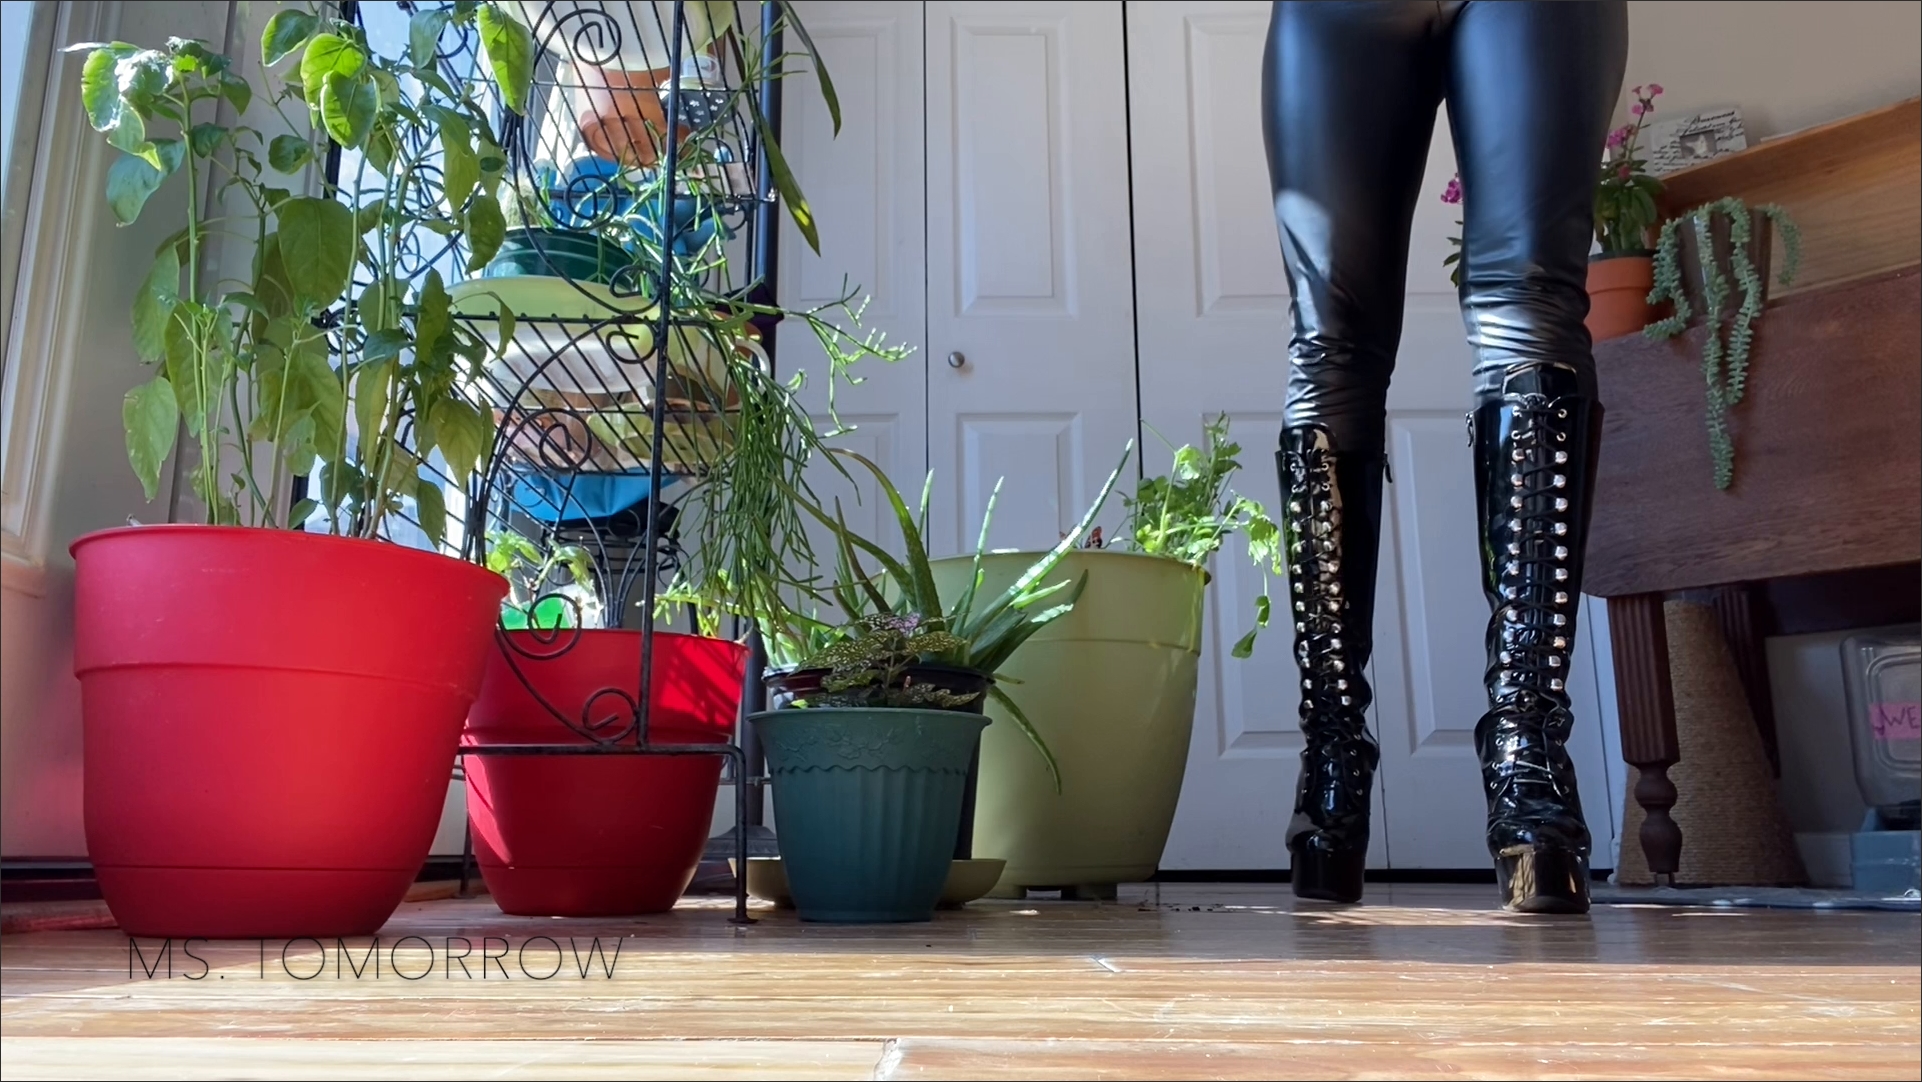 Domme Tomorrow Her Boots mp 4